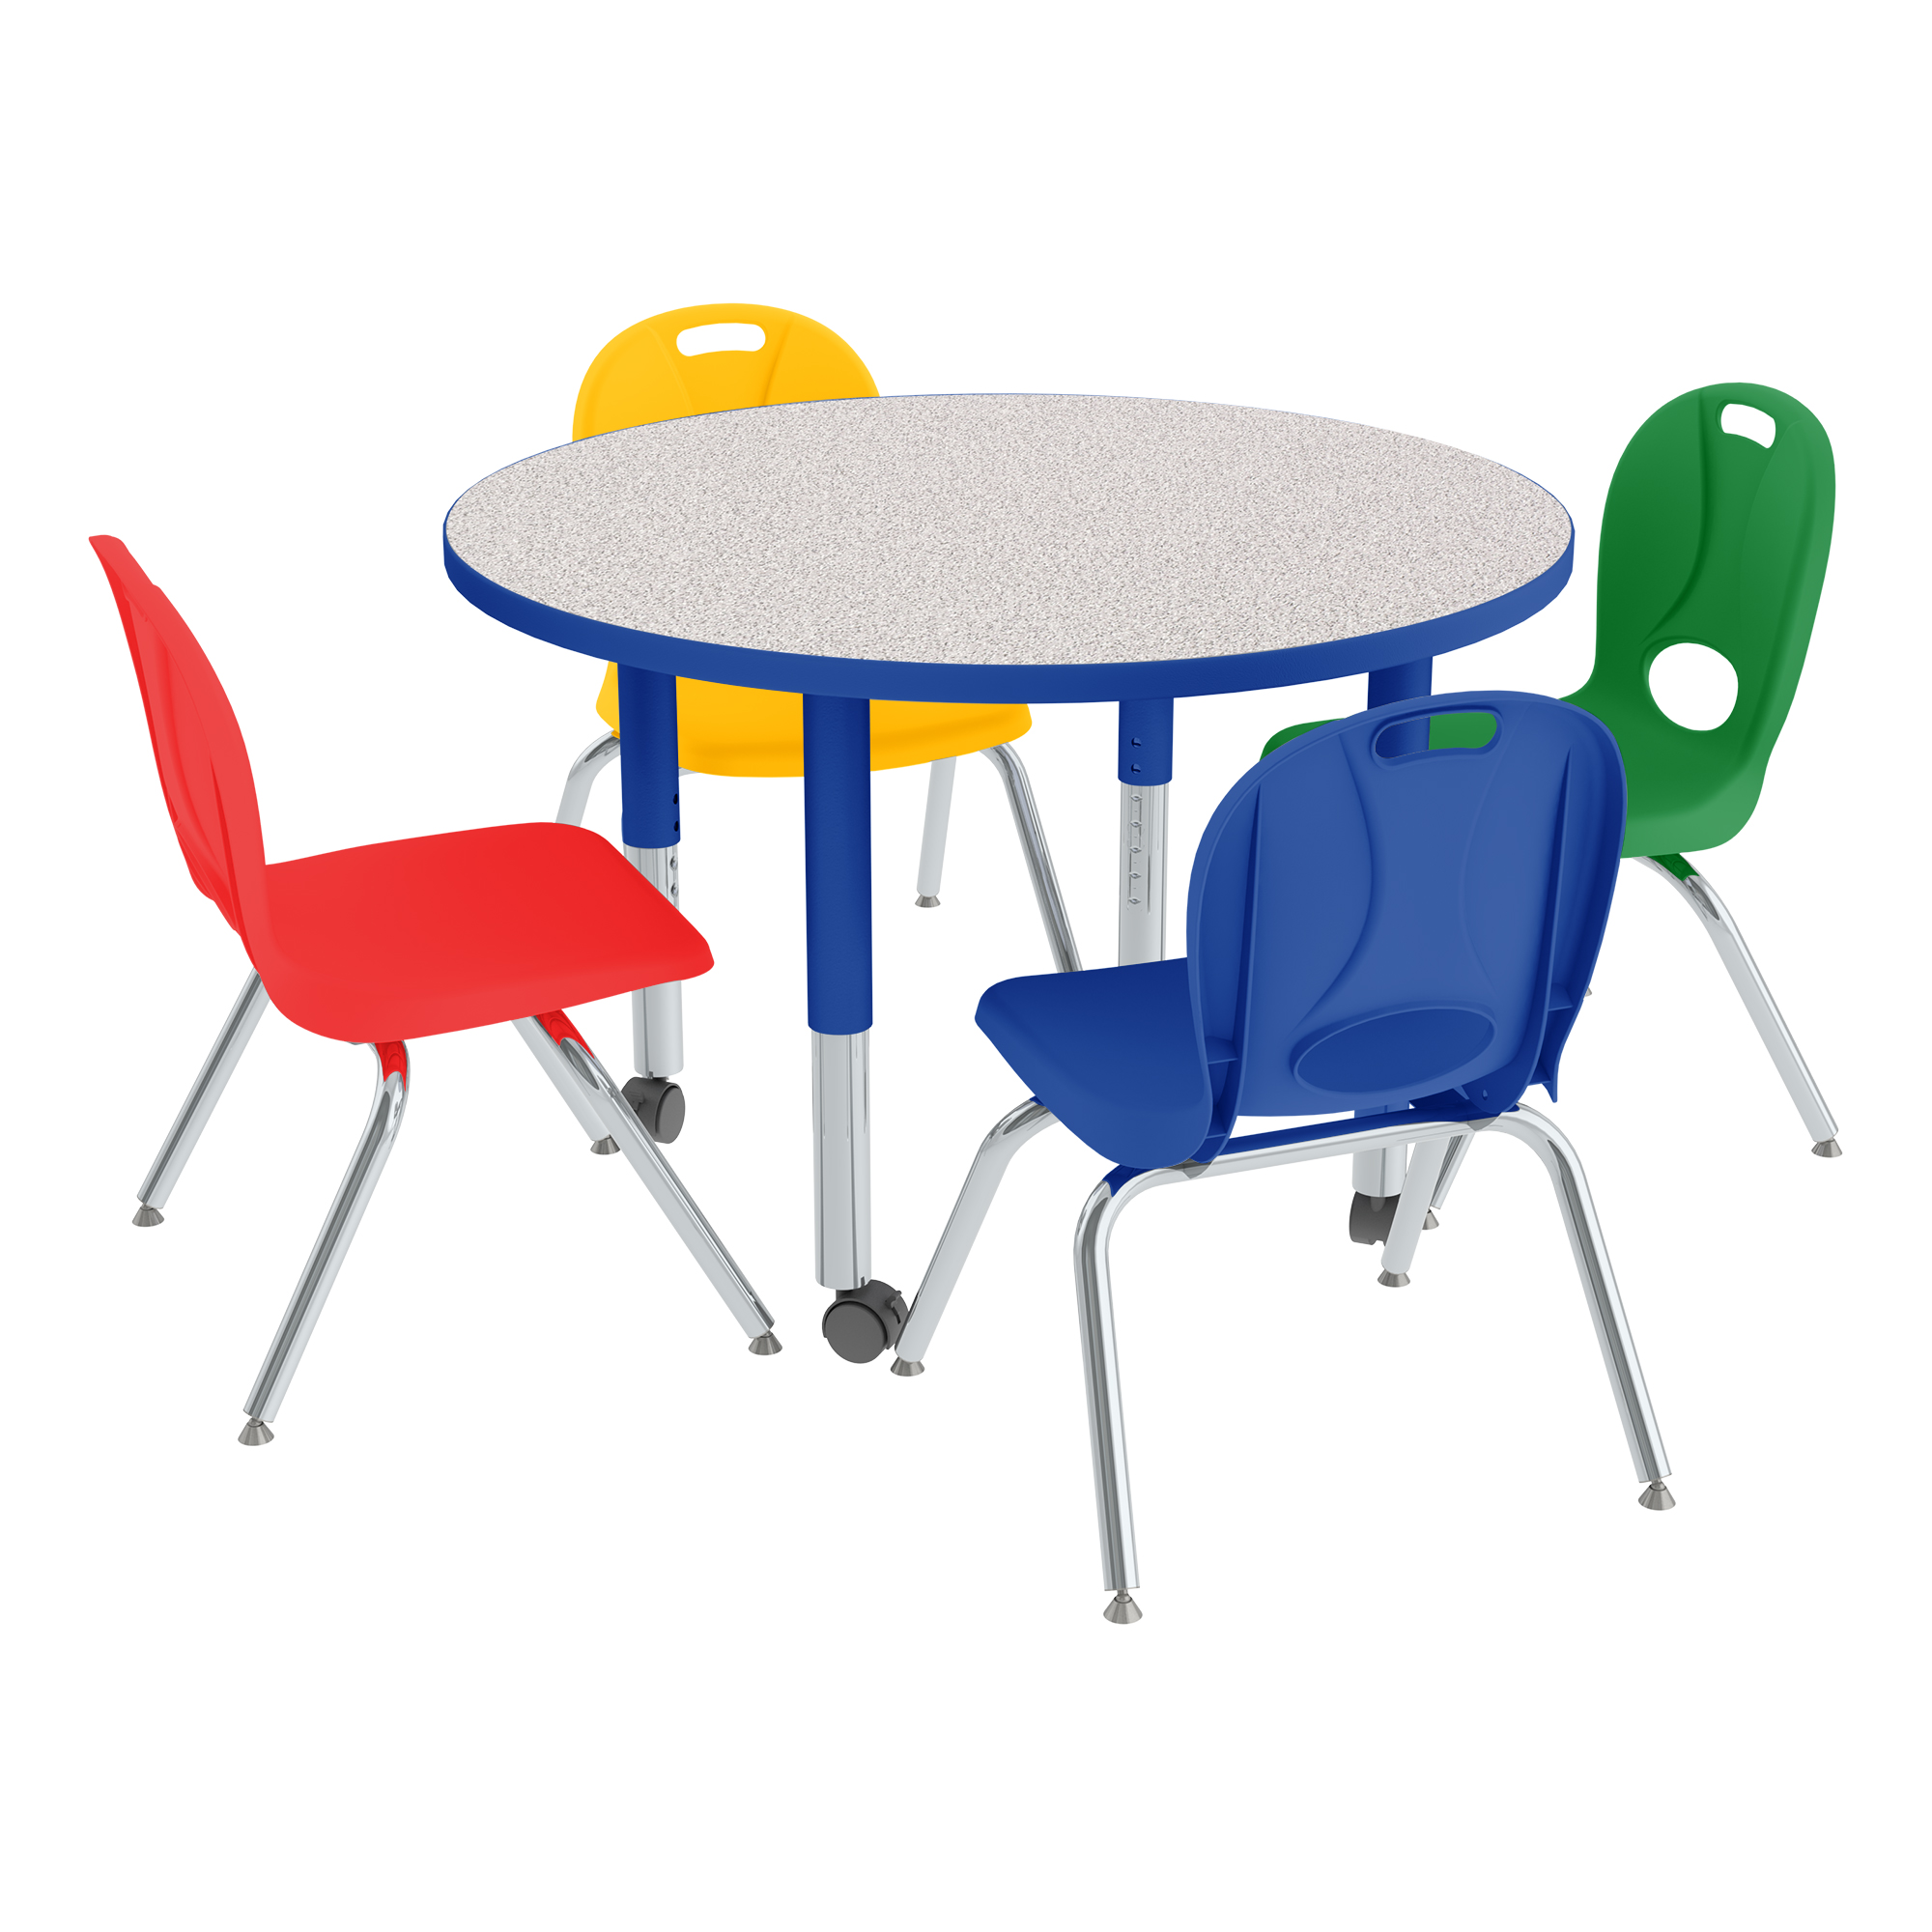 preschool table and chairs